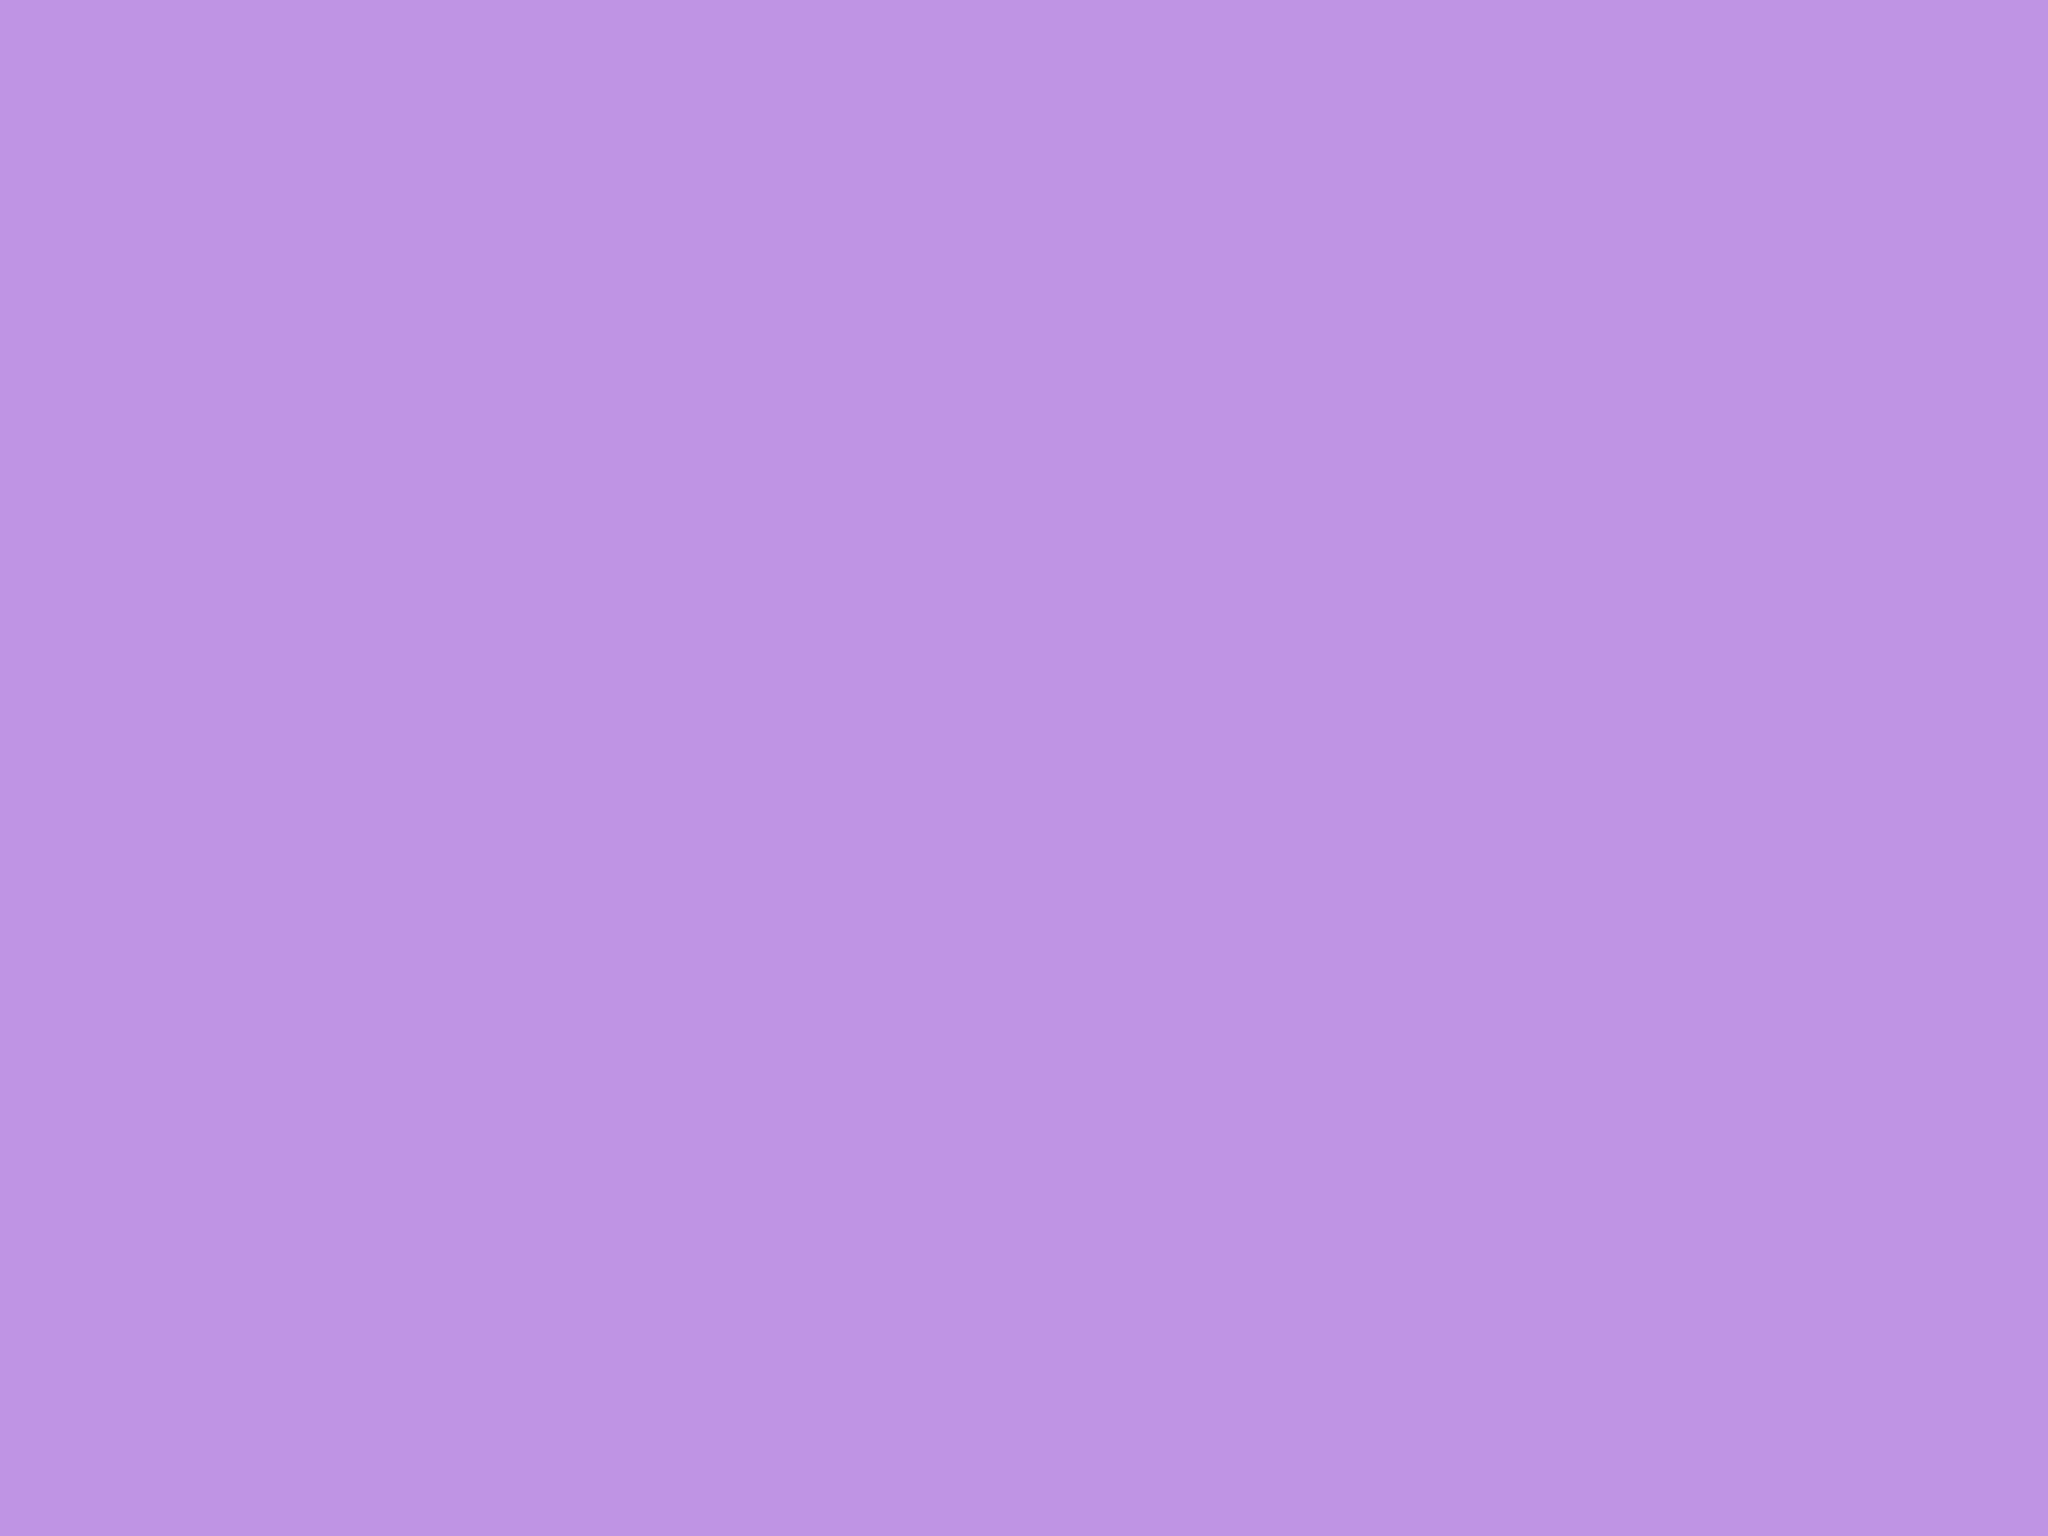 2048x1536 Bright Lavender Solid Color Background